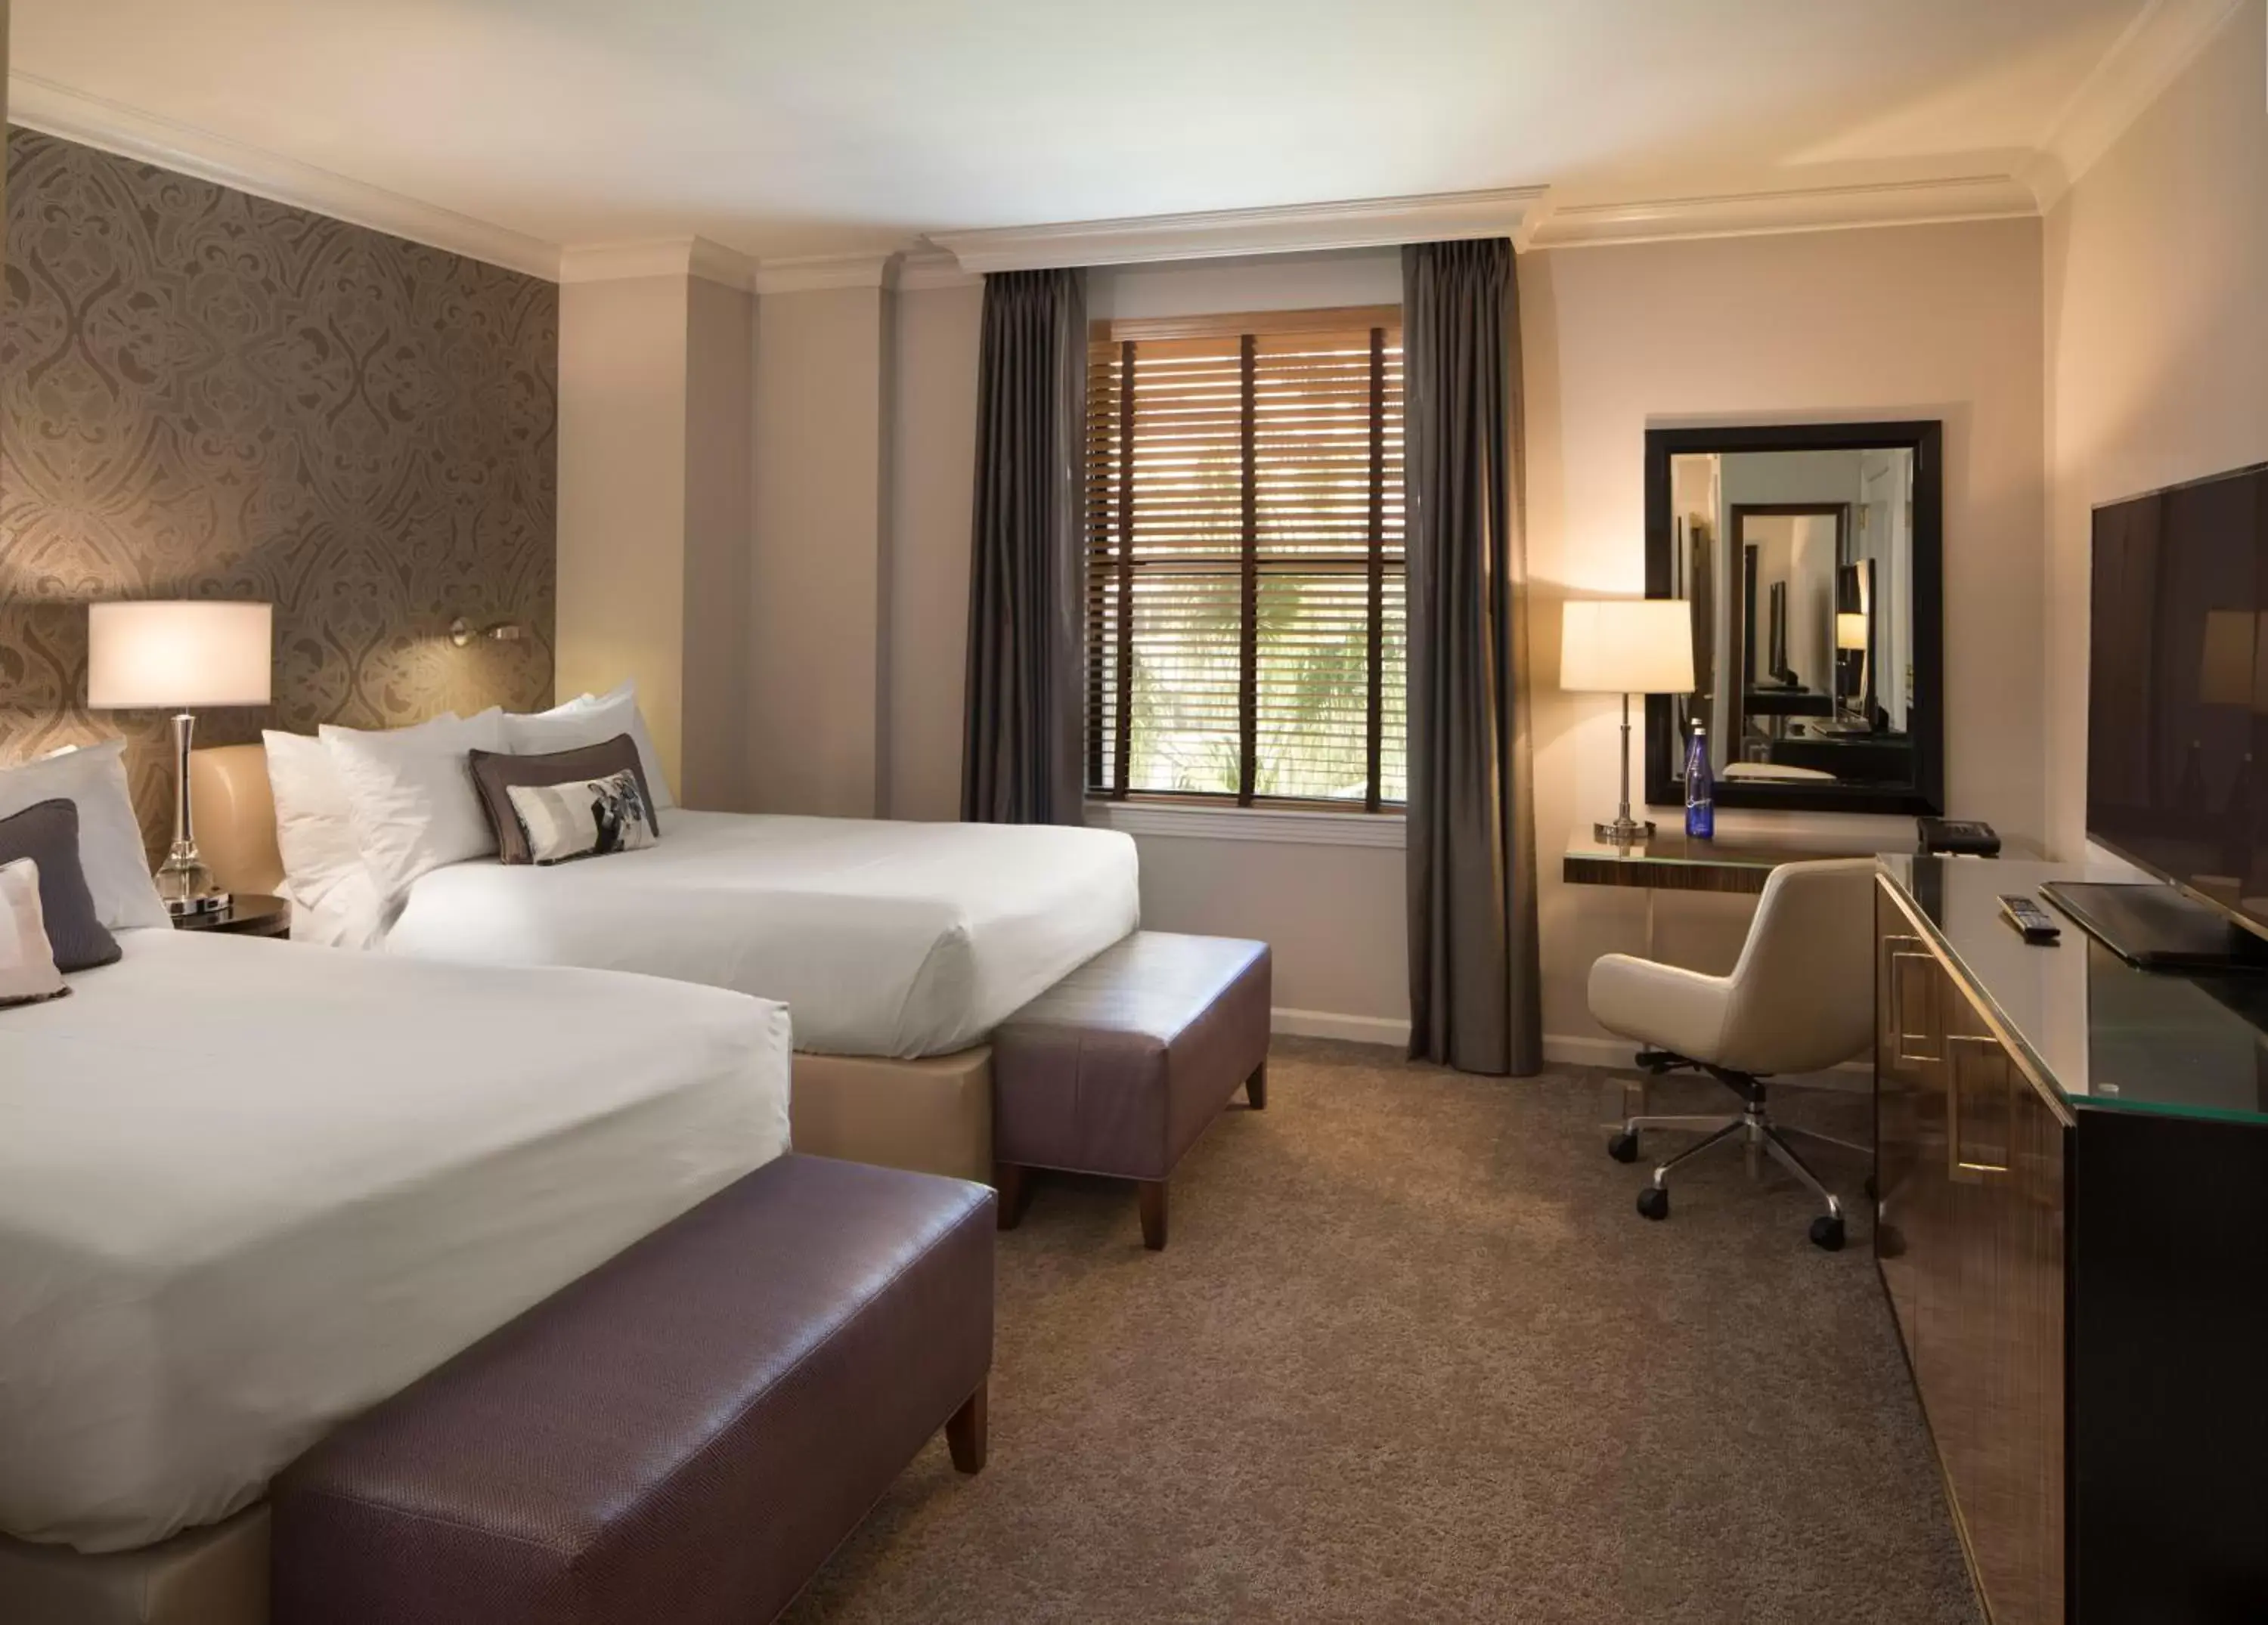 Double Room with Two Double Beds in Hotel De Anza, a Destination by Hyatt Hotel